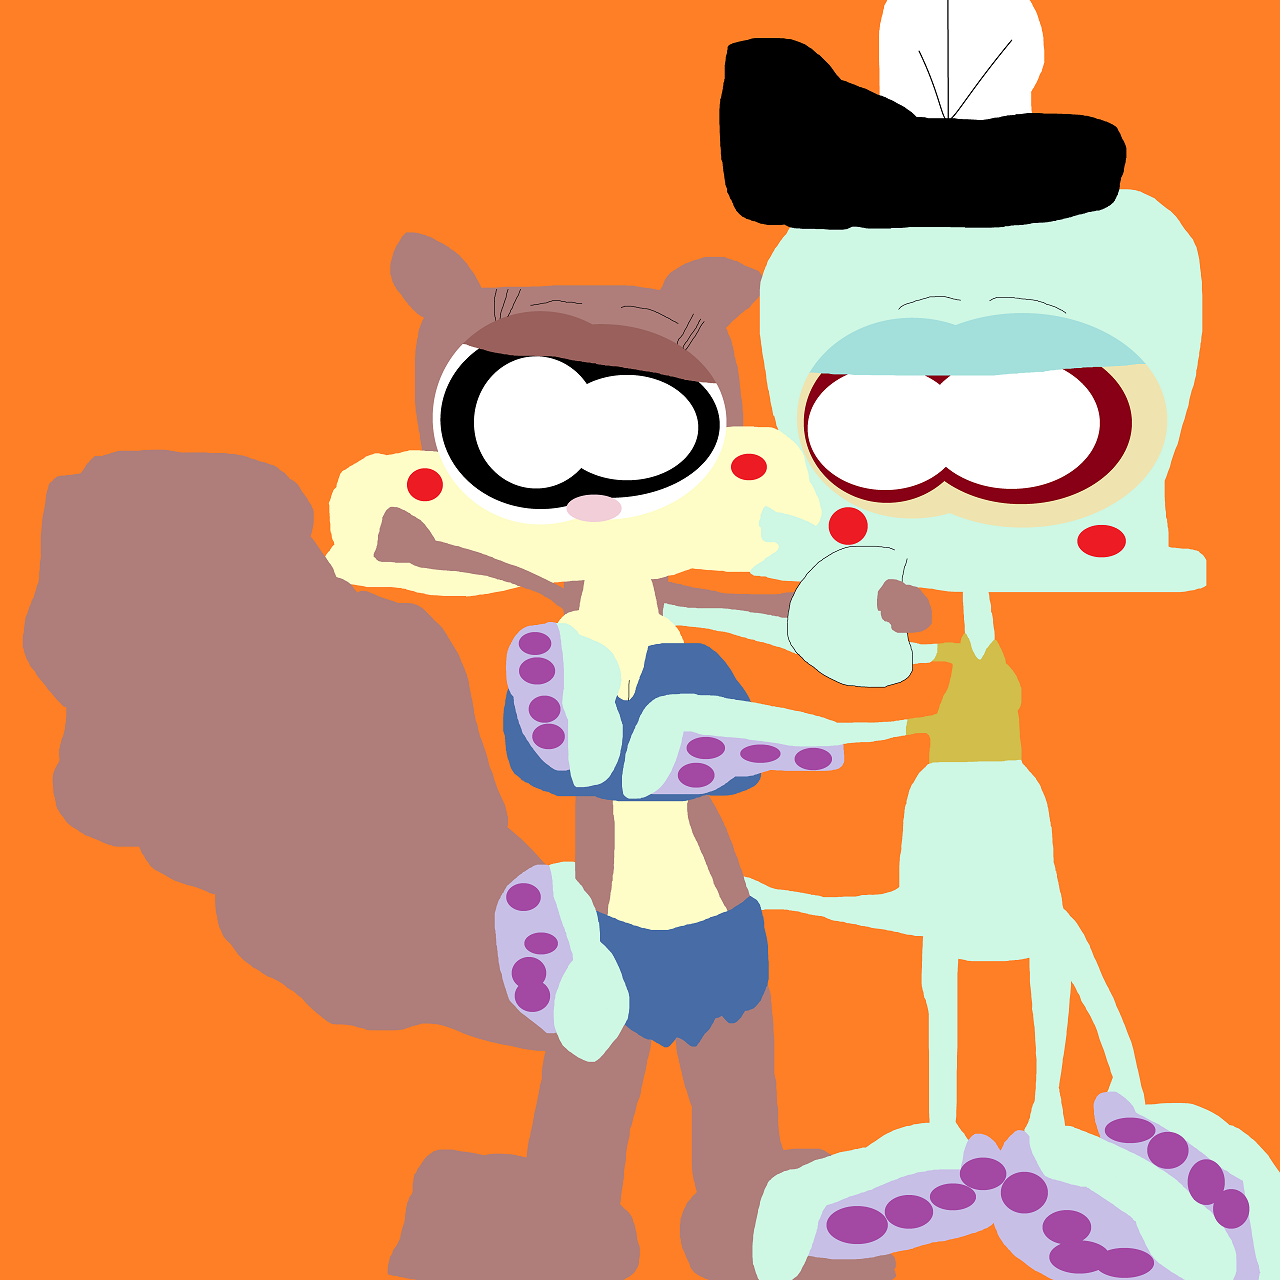 Just Another Random Squidward And Sandy Smooching by Falconlobo